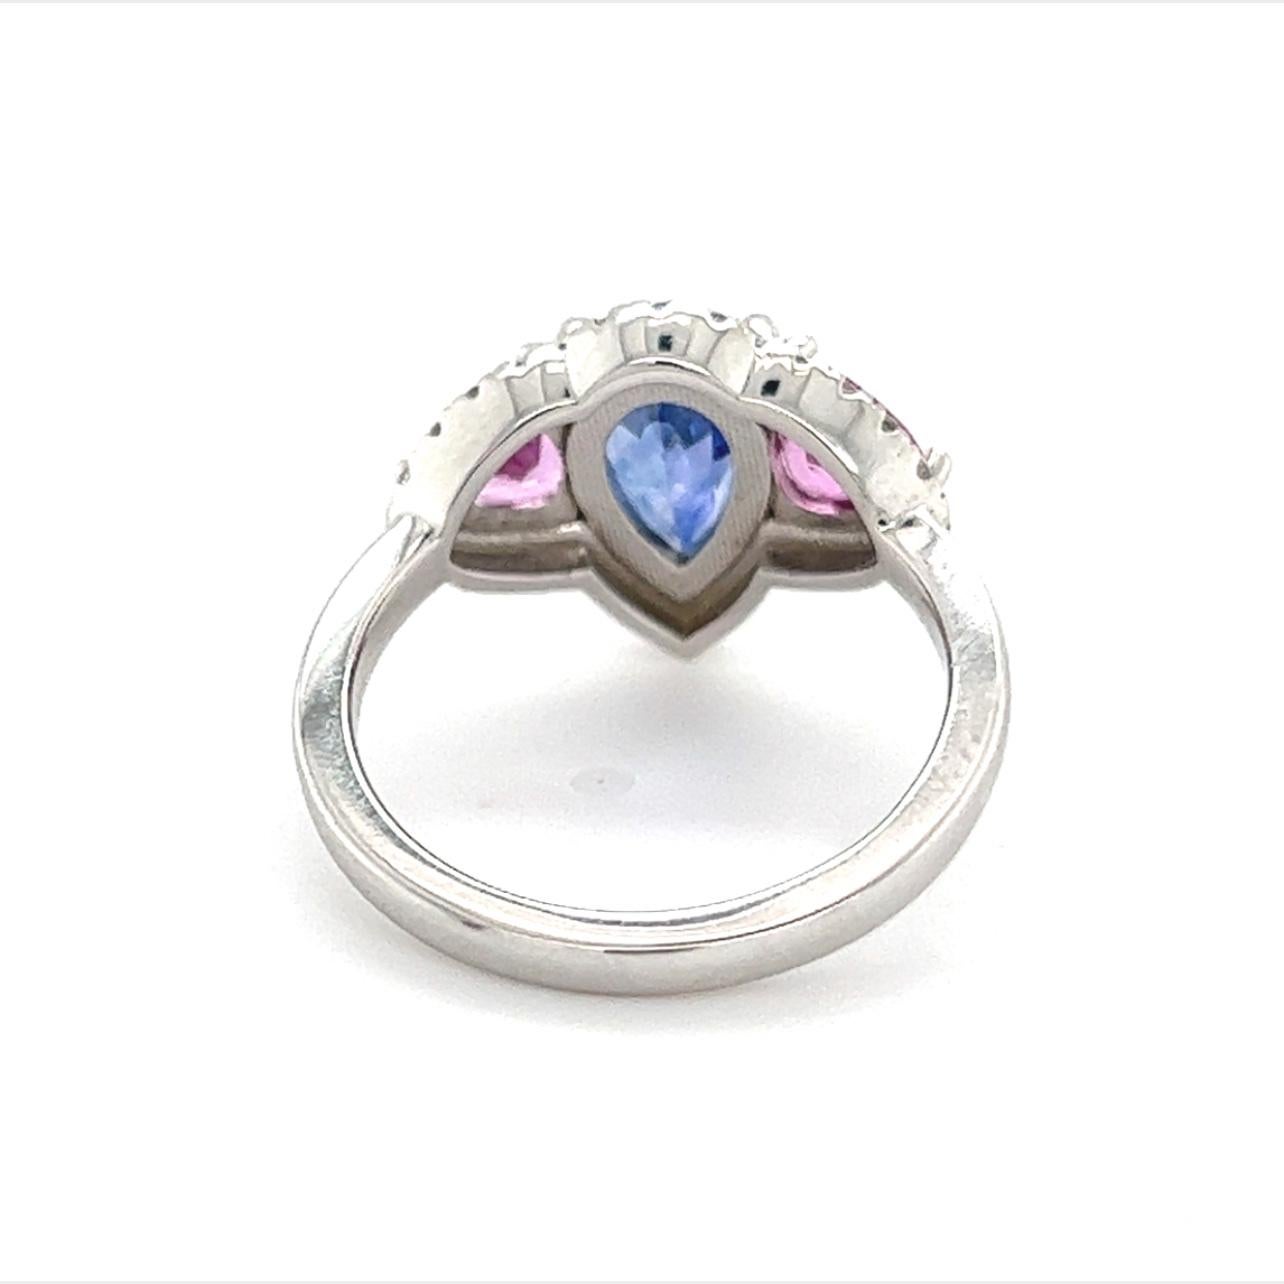 Women's Natural Sapphire Diamond Ring 14k Gold 3.43 TCW Certified For Sale